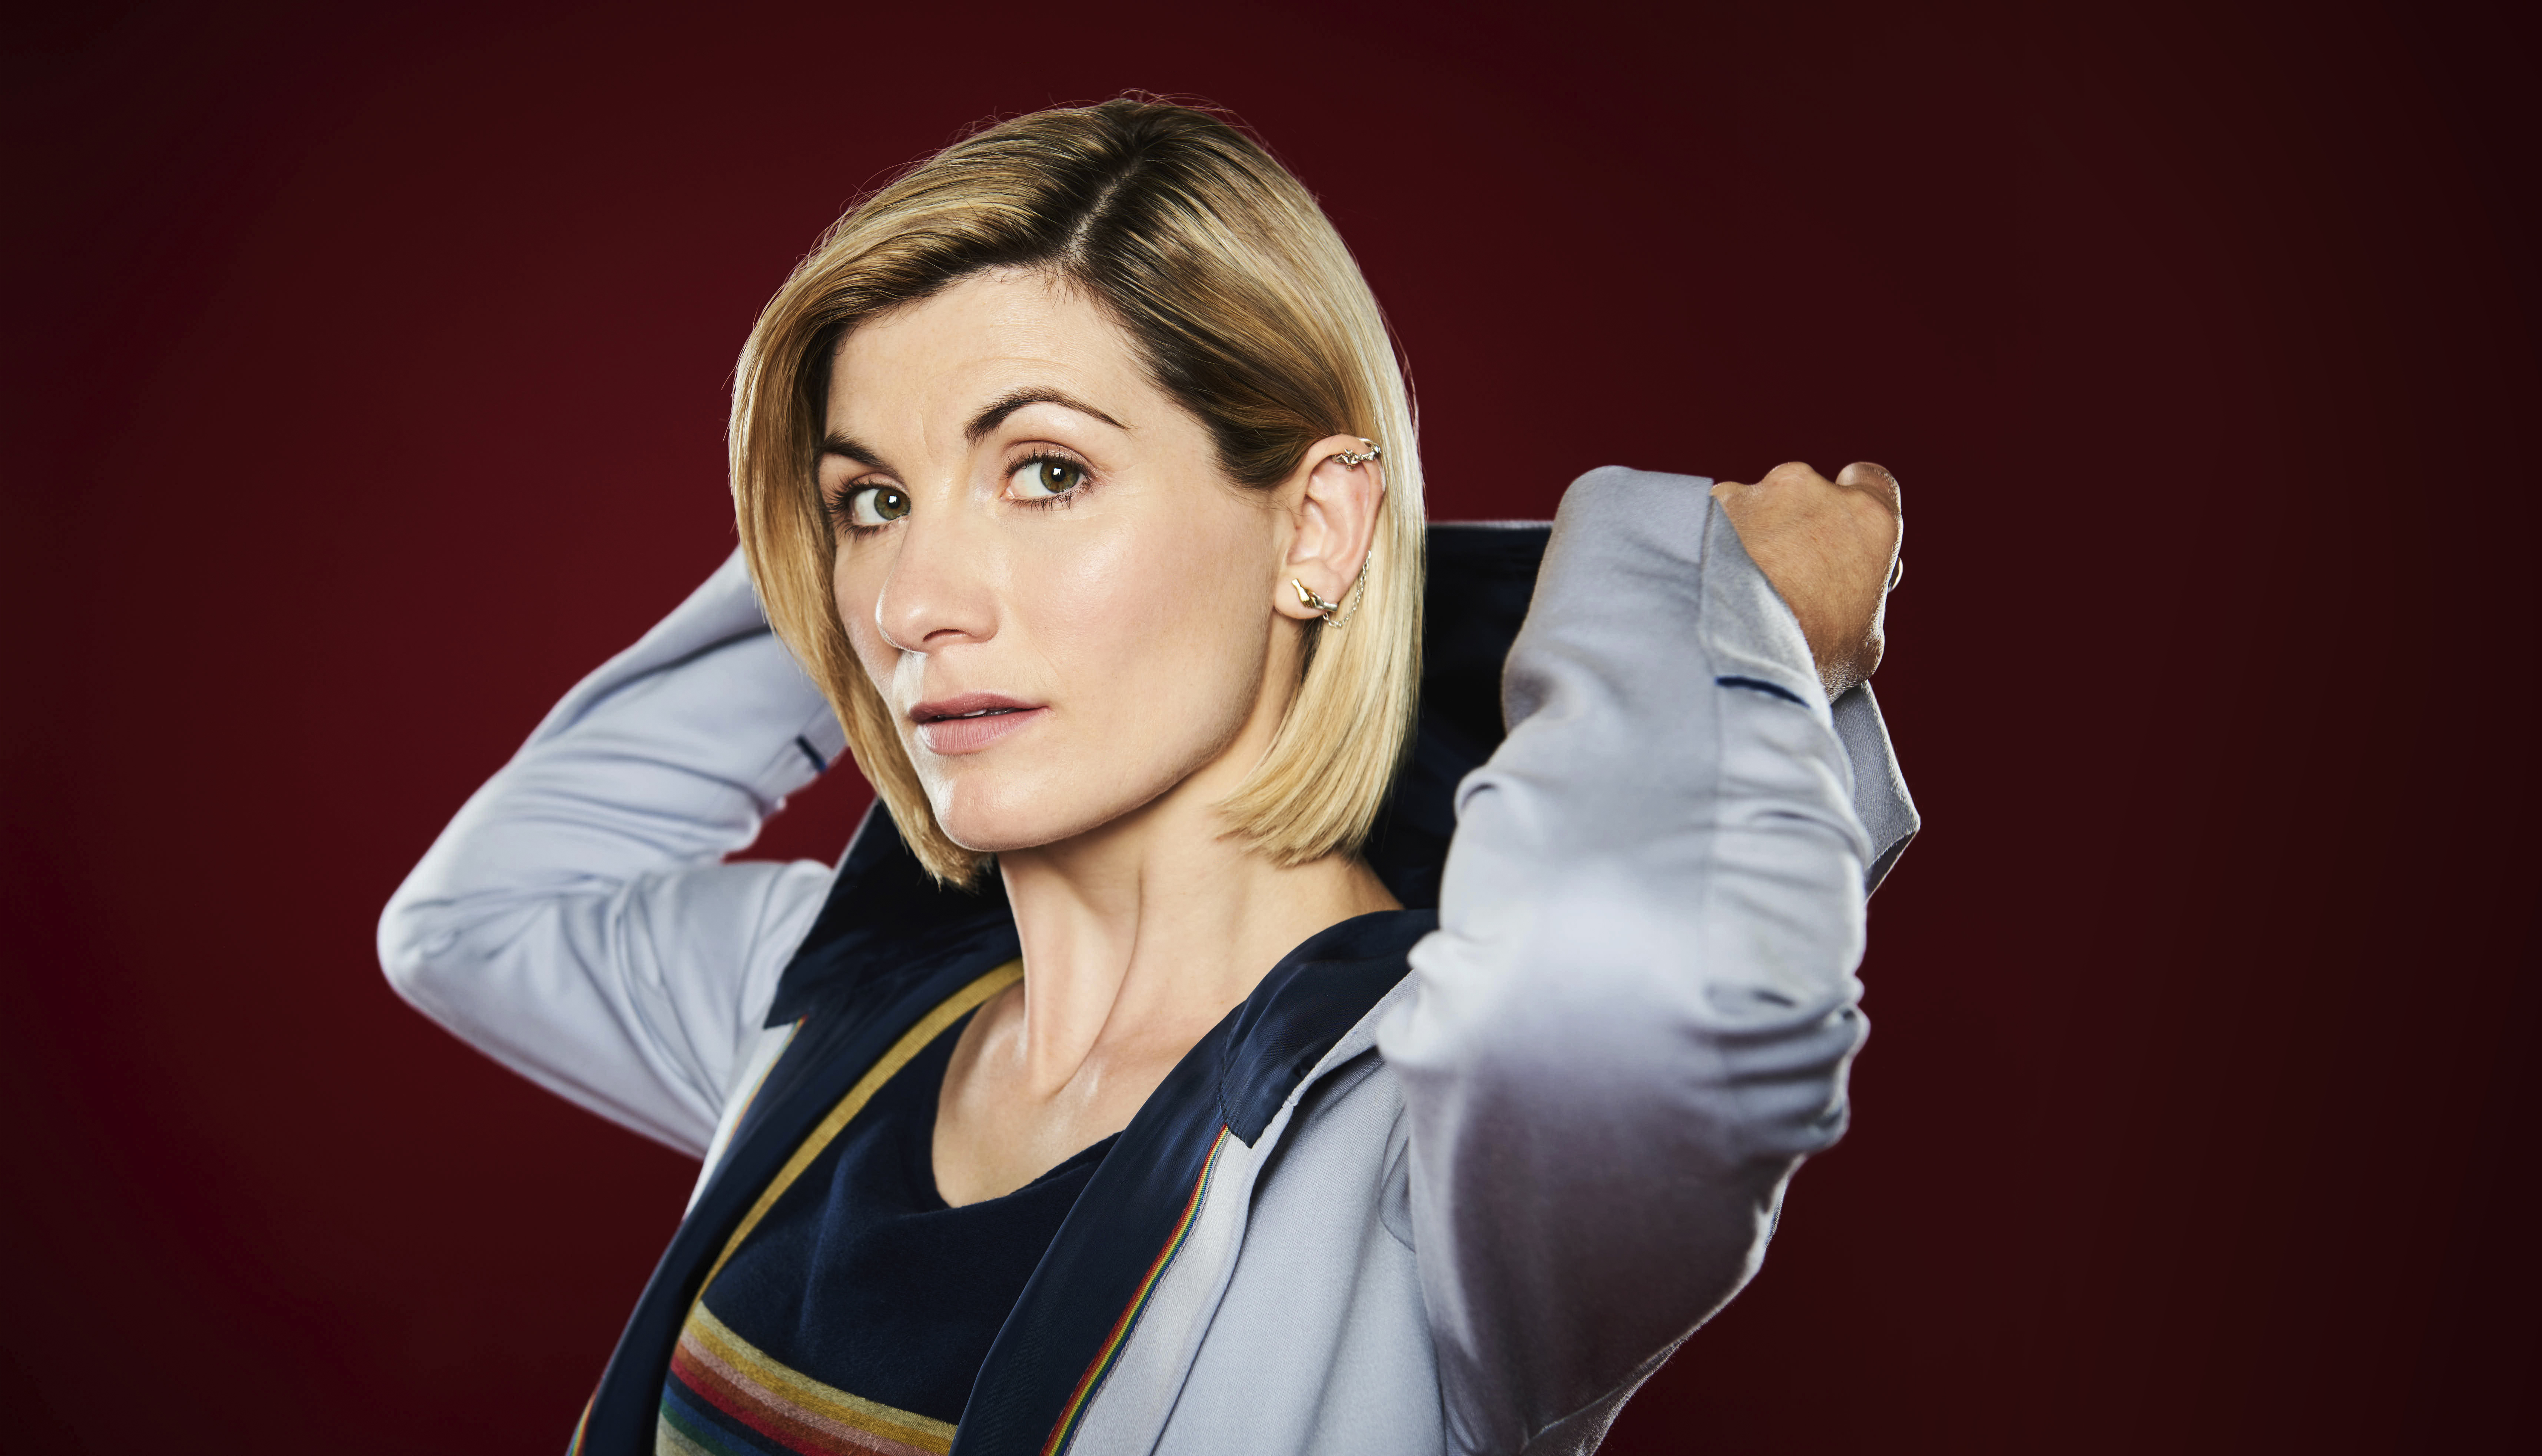 Jodie Whittakers First Doctor Who Teaser Trailer is Here!